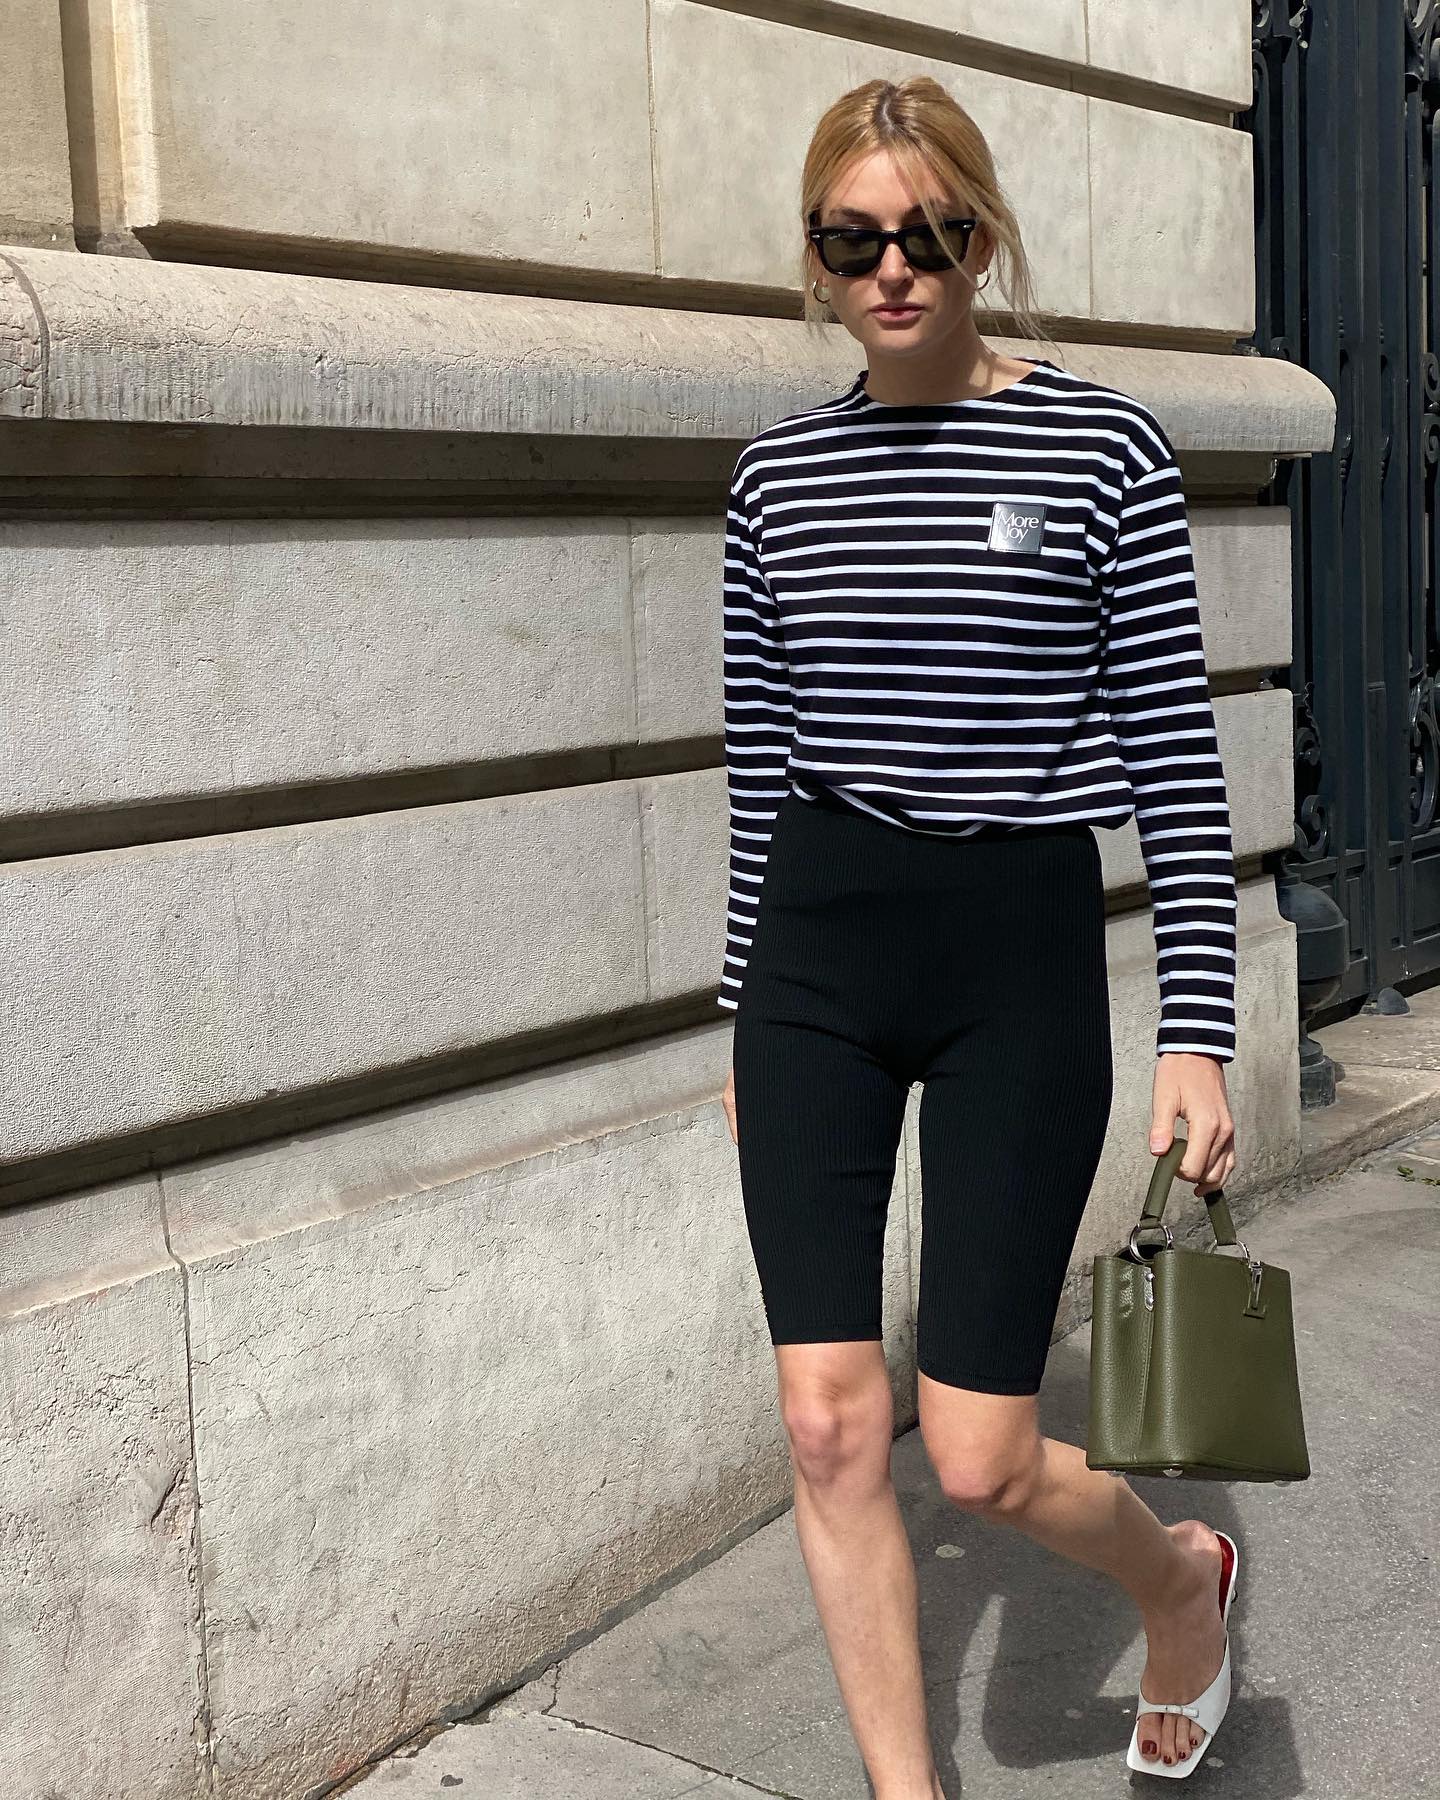 influencer Camille Charrière walks on the sidewalks of Paris wearing a striped long-sleeve tee, black capri pants, green Louis Vuitton bag, and white square-toe mule heels